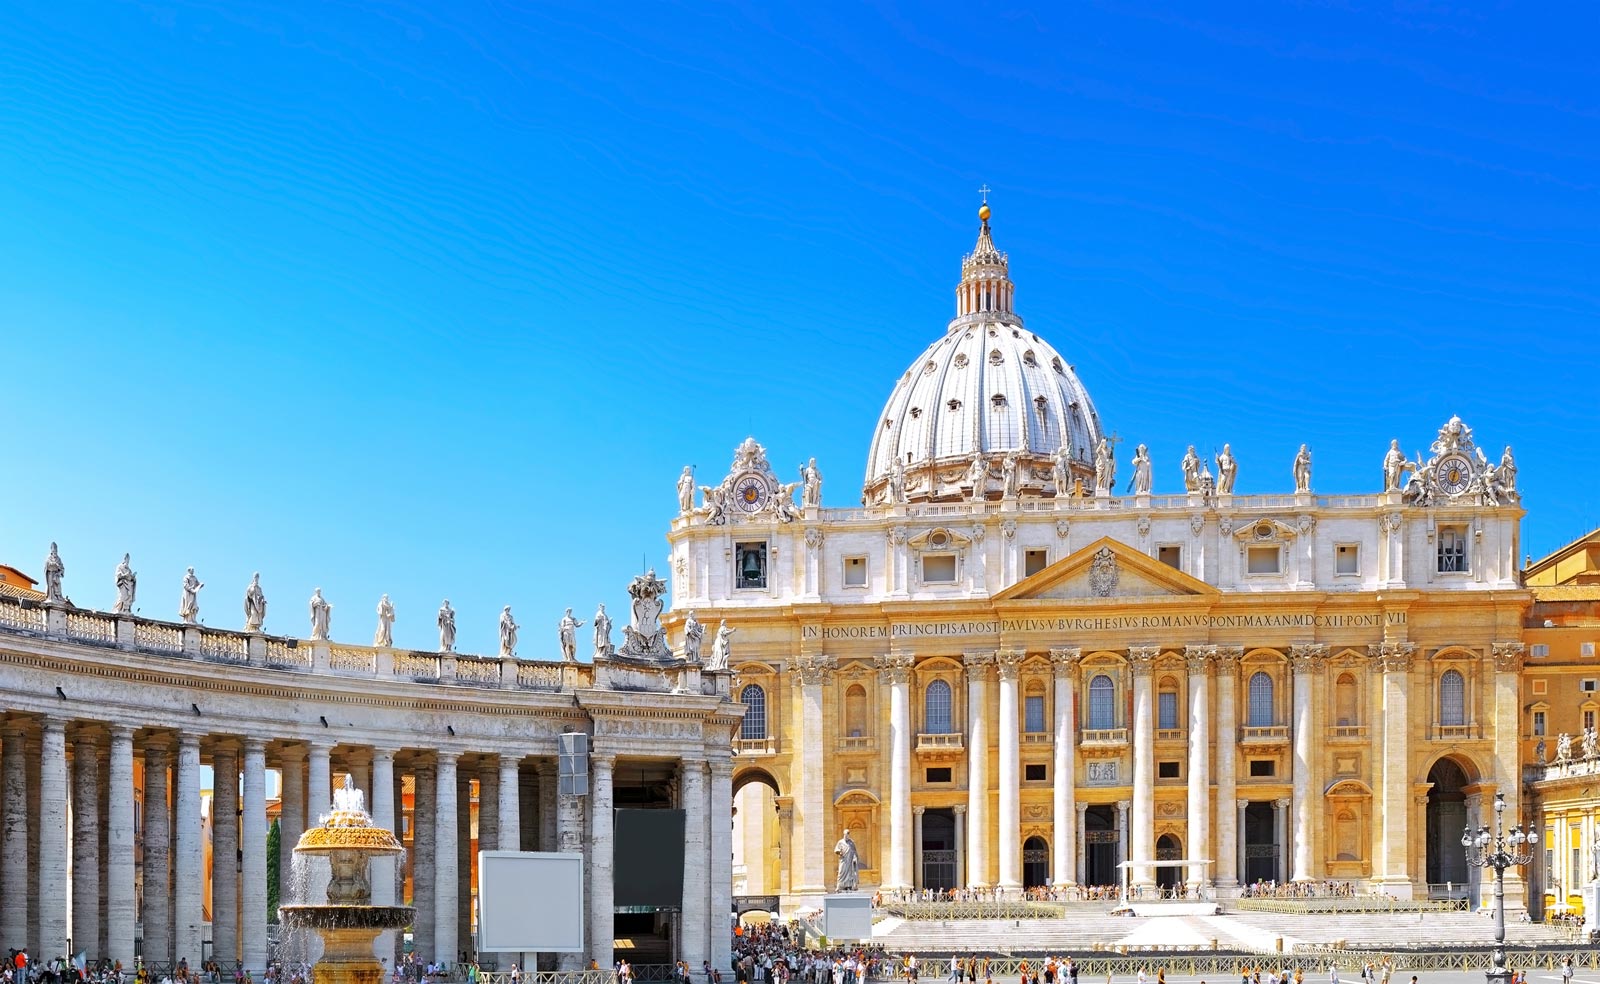 Vatican City is among the most important religious and culture sites, attracting millions of visitors a year and a must-see when in Rome.